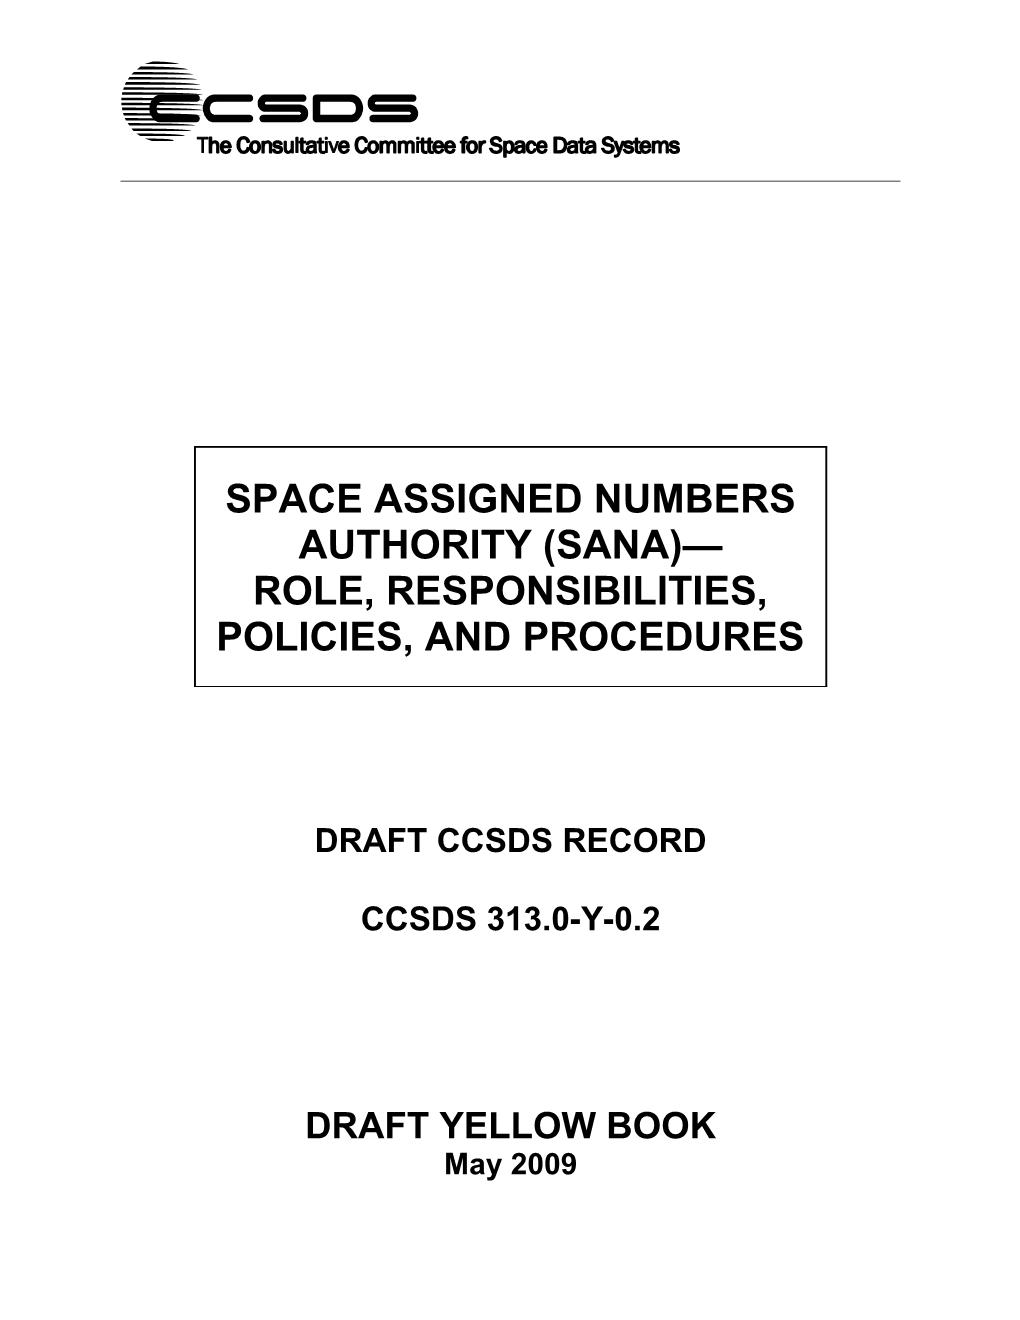 Space Assigned Numbers Authority (SANA) Role, Responsibilities, Policies, and Procedures